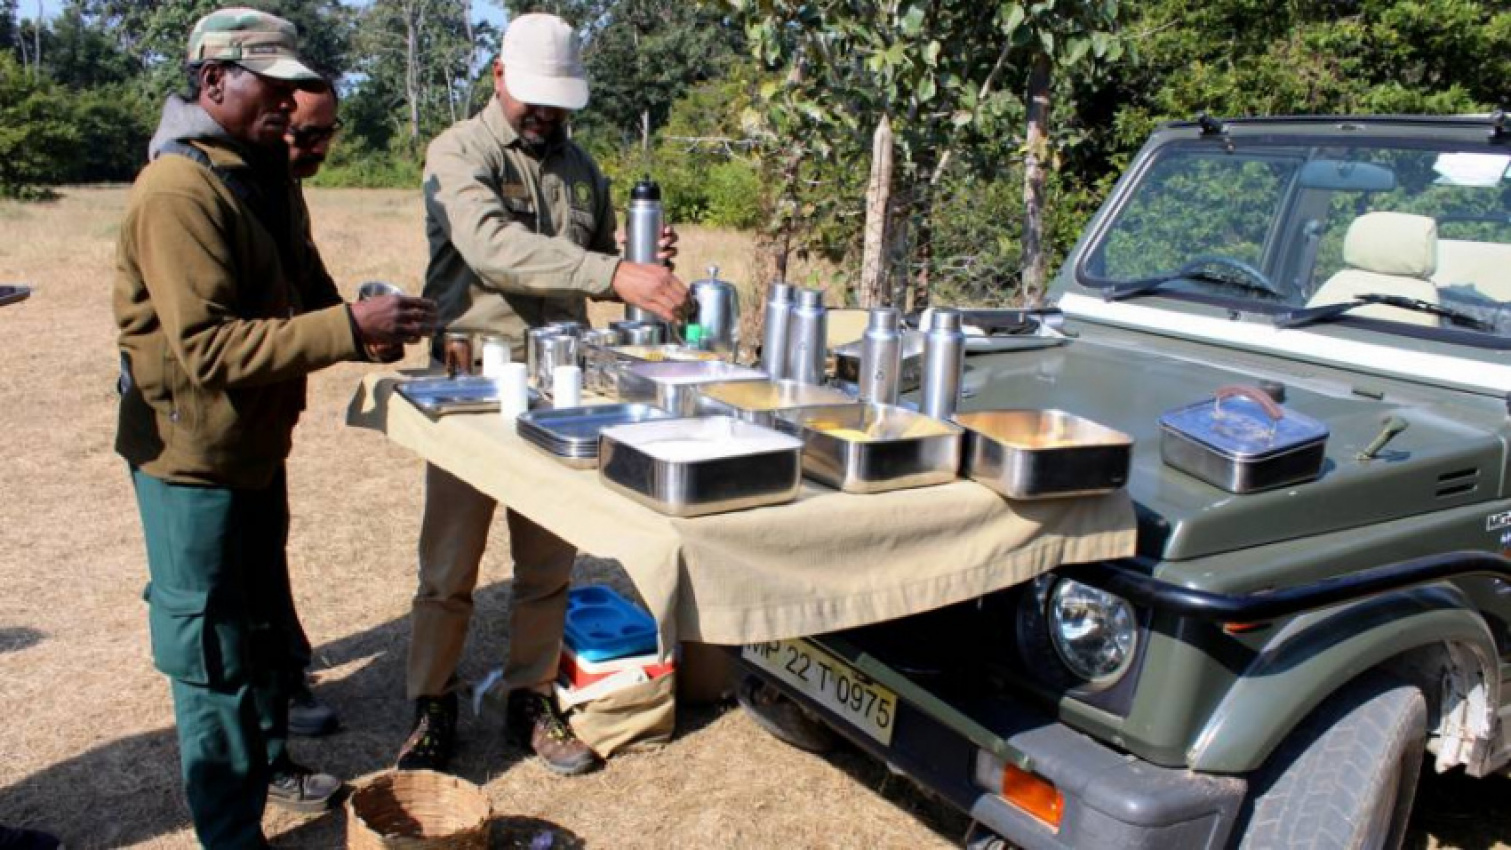 autos, cars, features, bonnet breakfasts, driving holidays, madhya pradesh, maruti gypsy, overdrive, road trips, tiger reserves, vnex, wildlife resorts, wildlife safaris, wildlife tourism, bonnet breakfasts